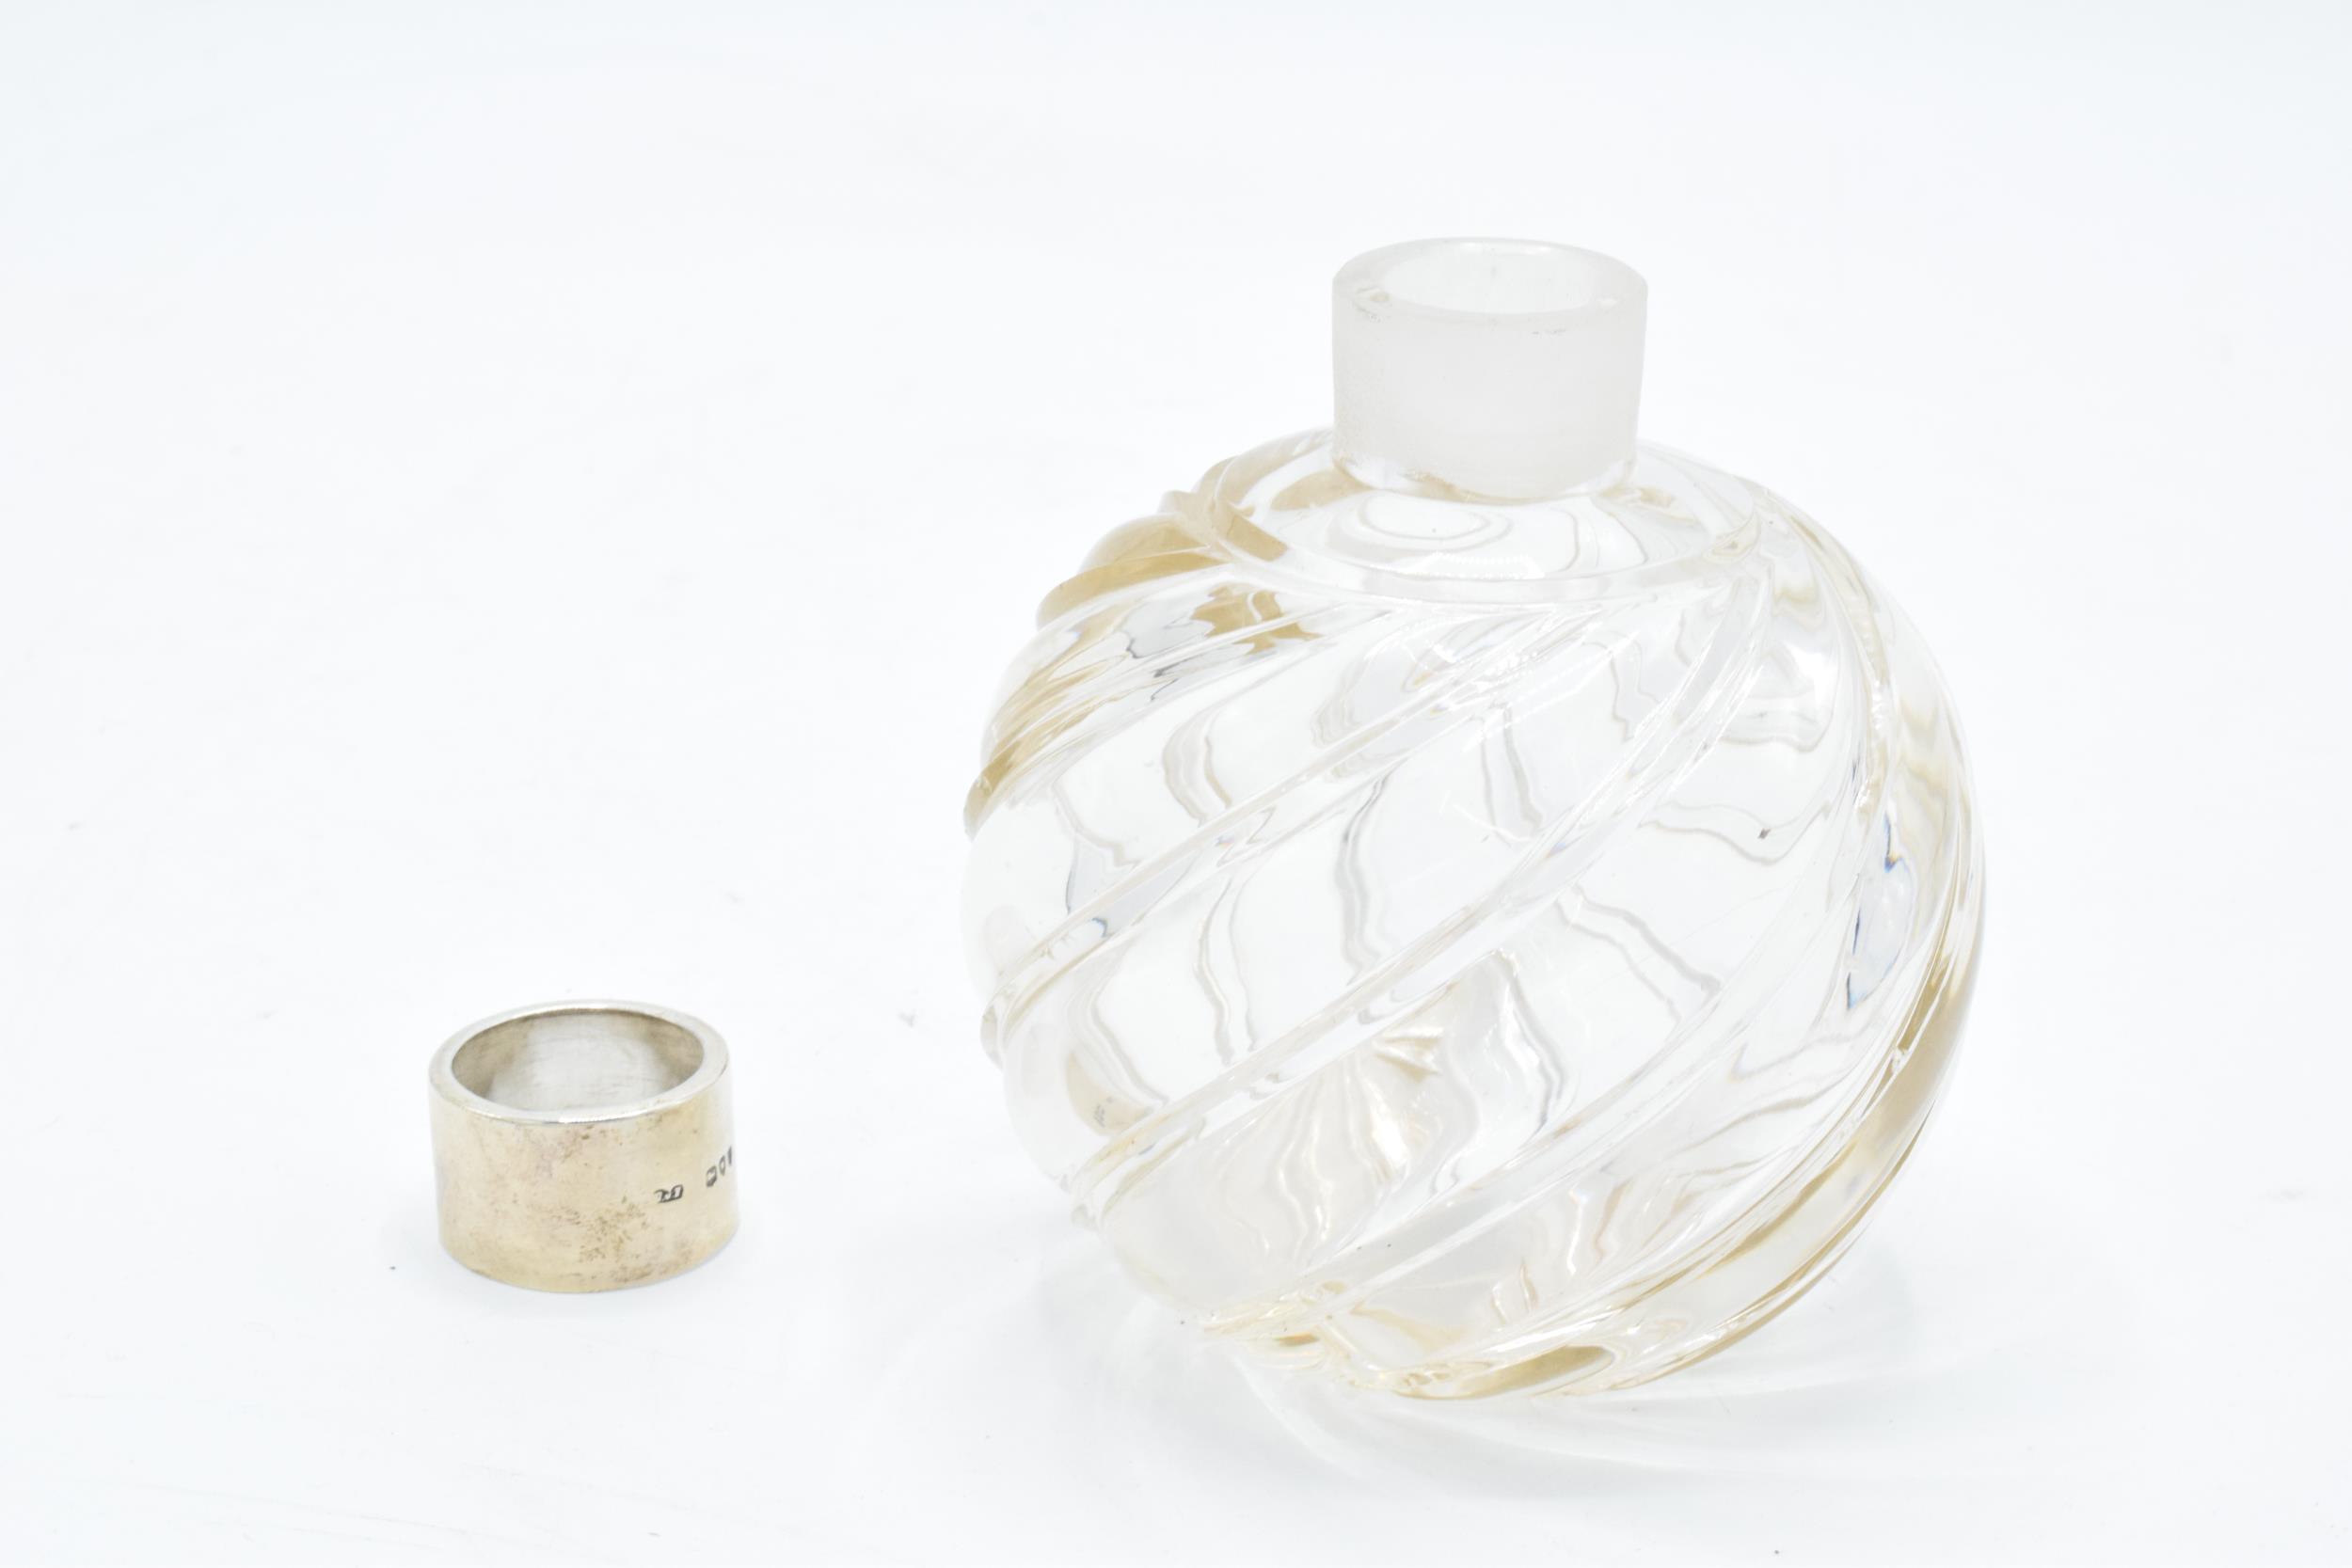 Silver topped scent bottle with swirling glass decoration 13cm tall. Hallmarked for London, - Image 6 of 6